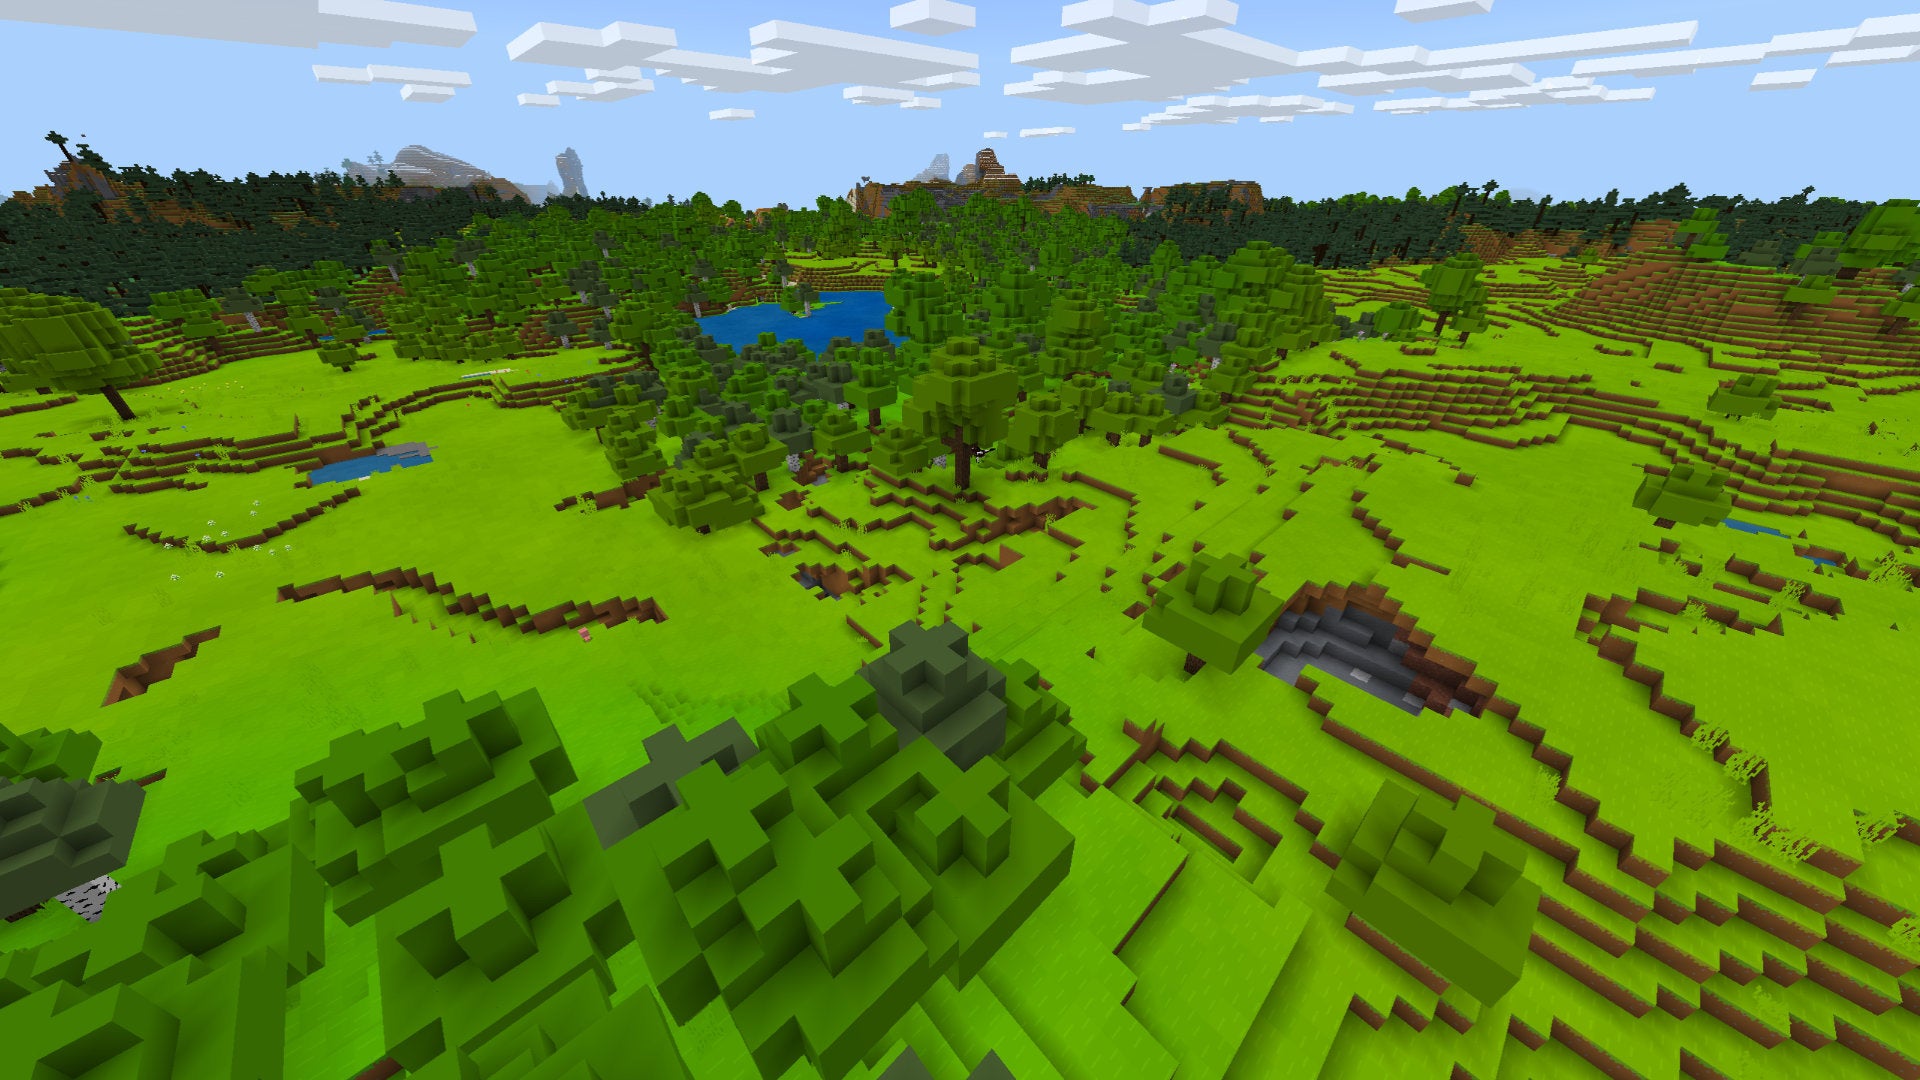 A Minecraft Bedrock screenshot of a landscape displayed using the PastelCraft Texture Pack.